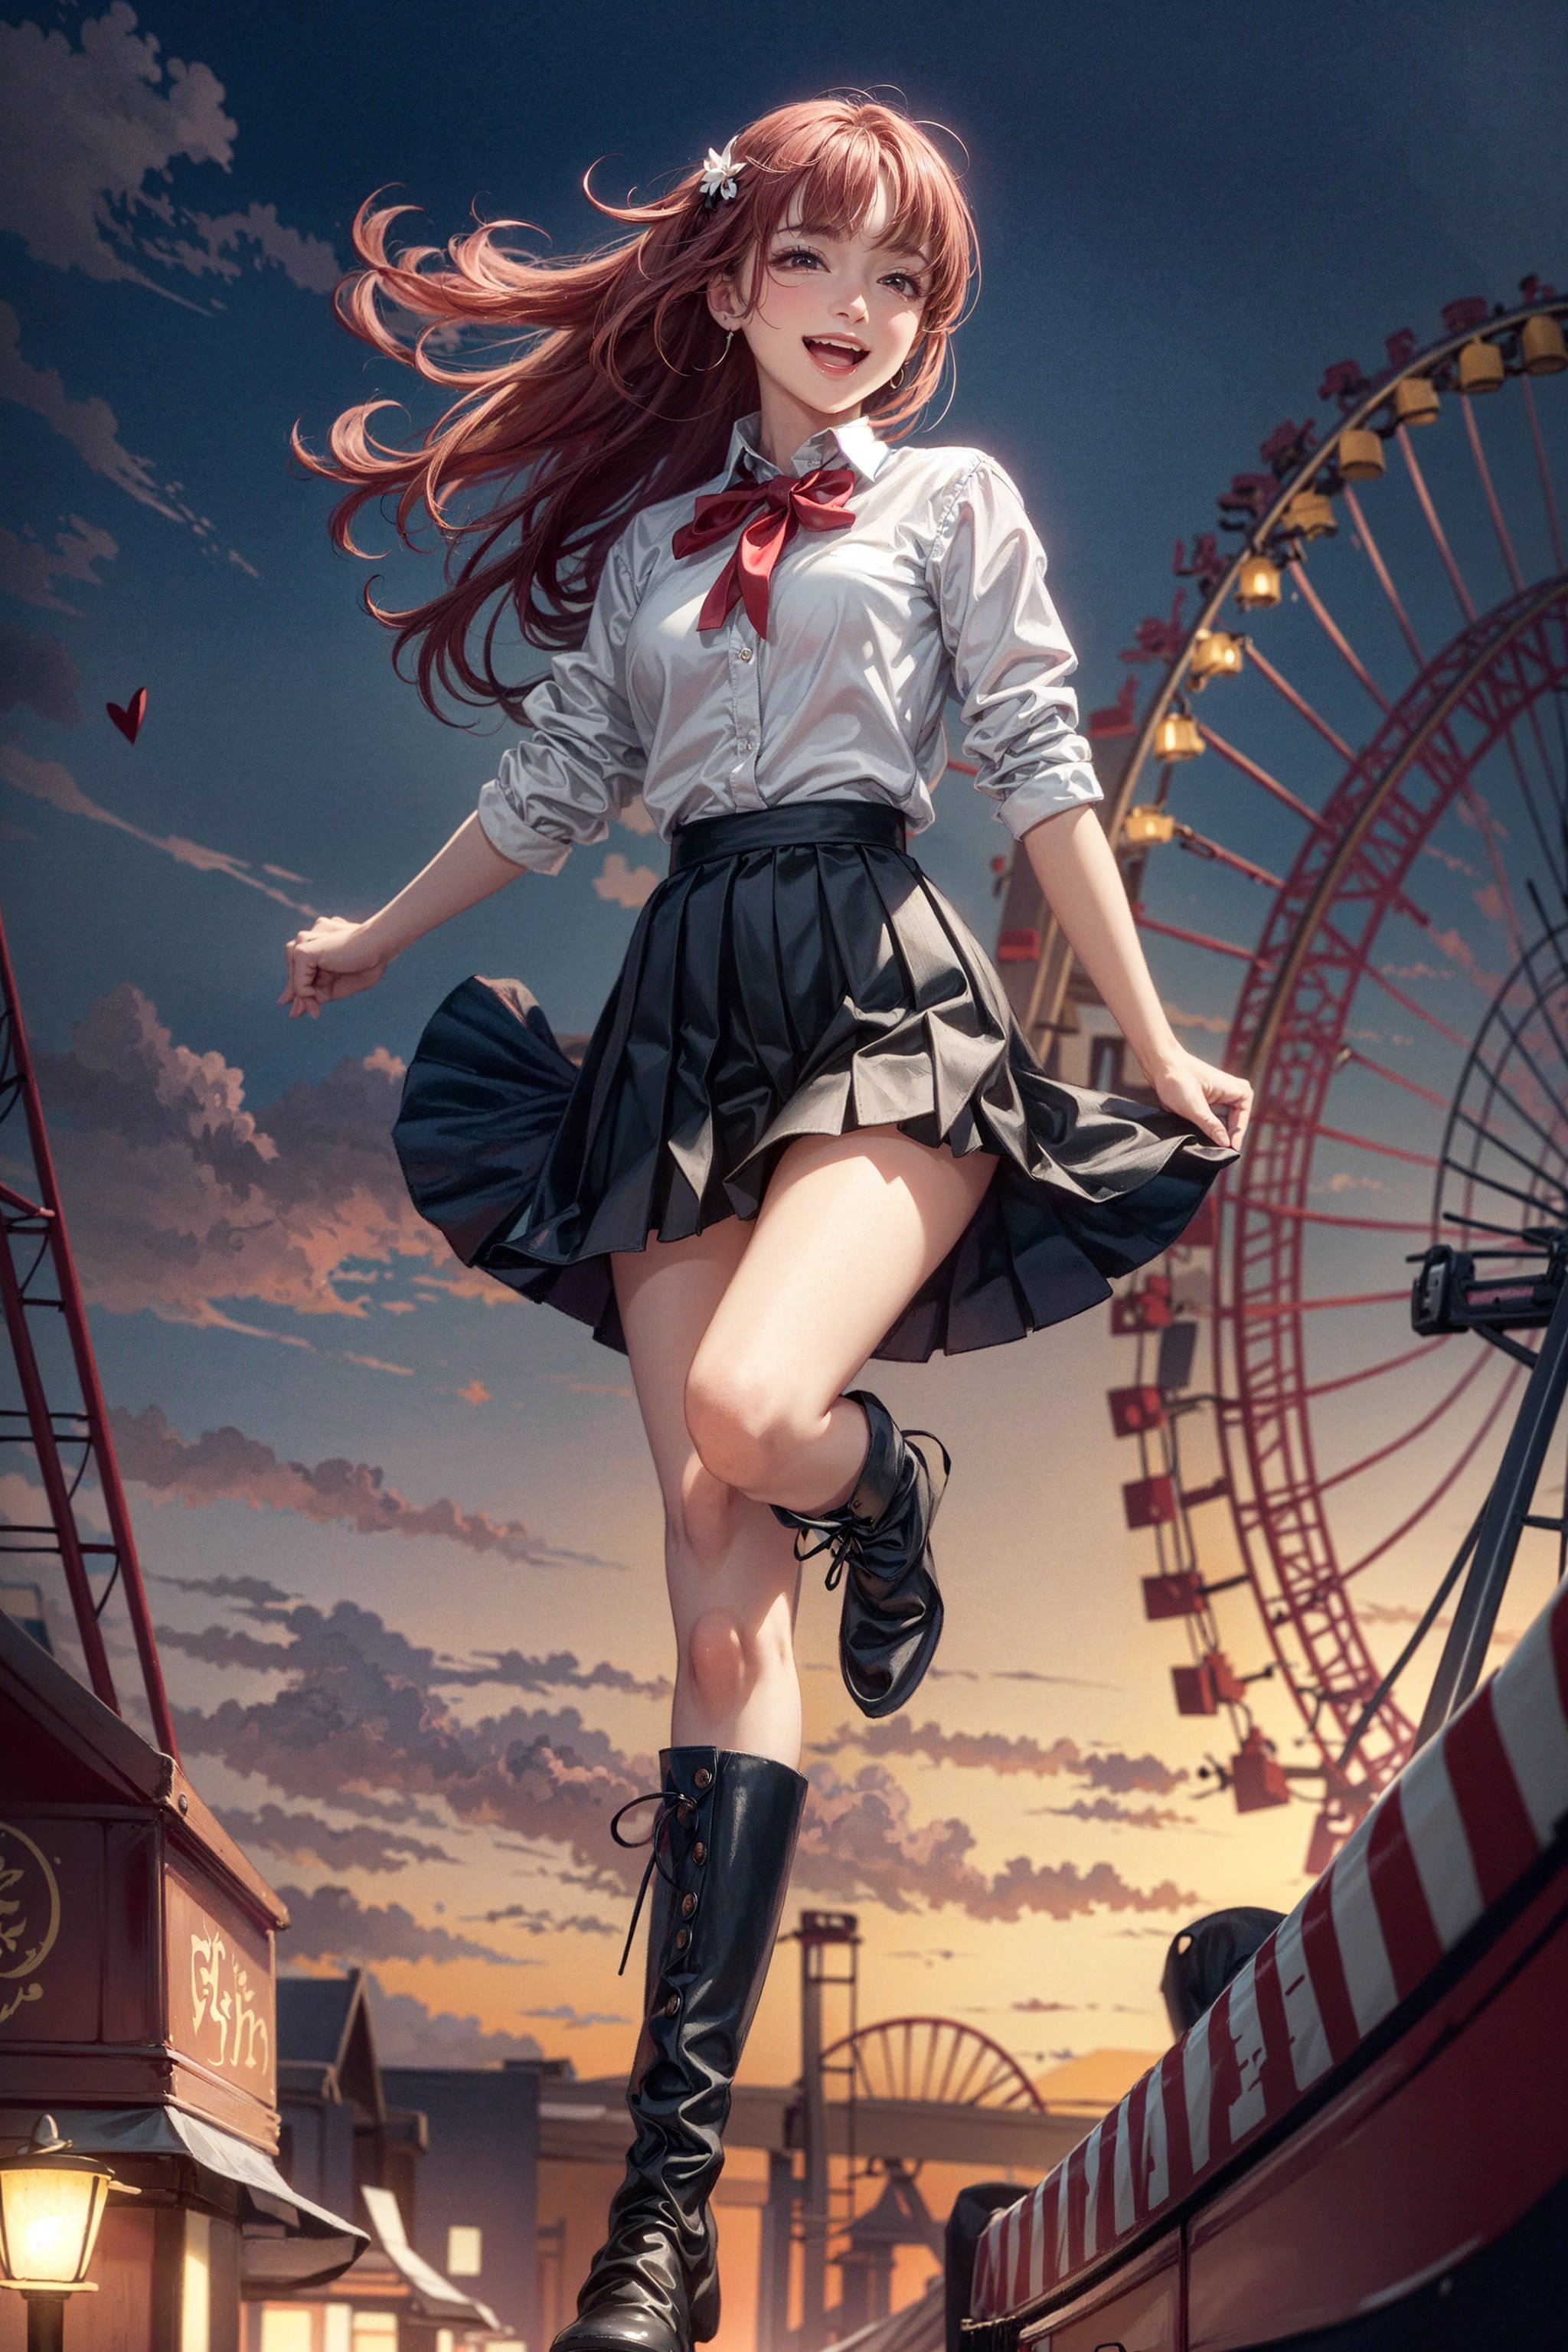 oft lighting, scenic background, carnival, roller coasters, gekkoukan high school uniform, white button up shirt, black pleated skirt, boots, red hair over on eye, excited happy expression, hearts